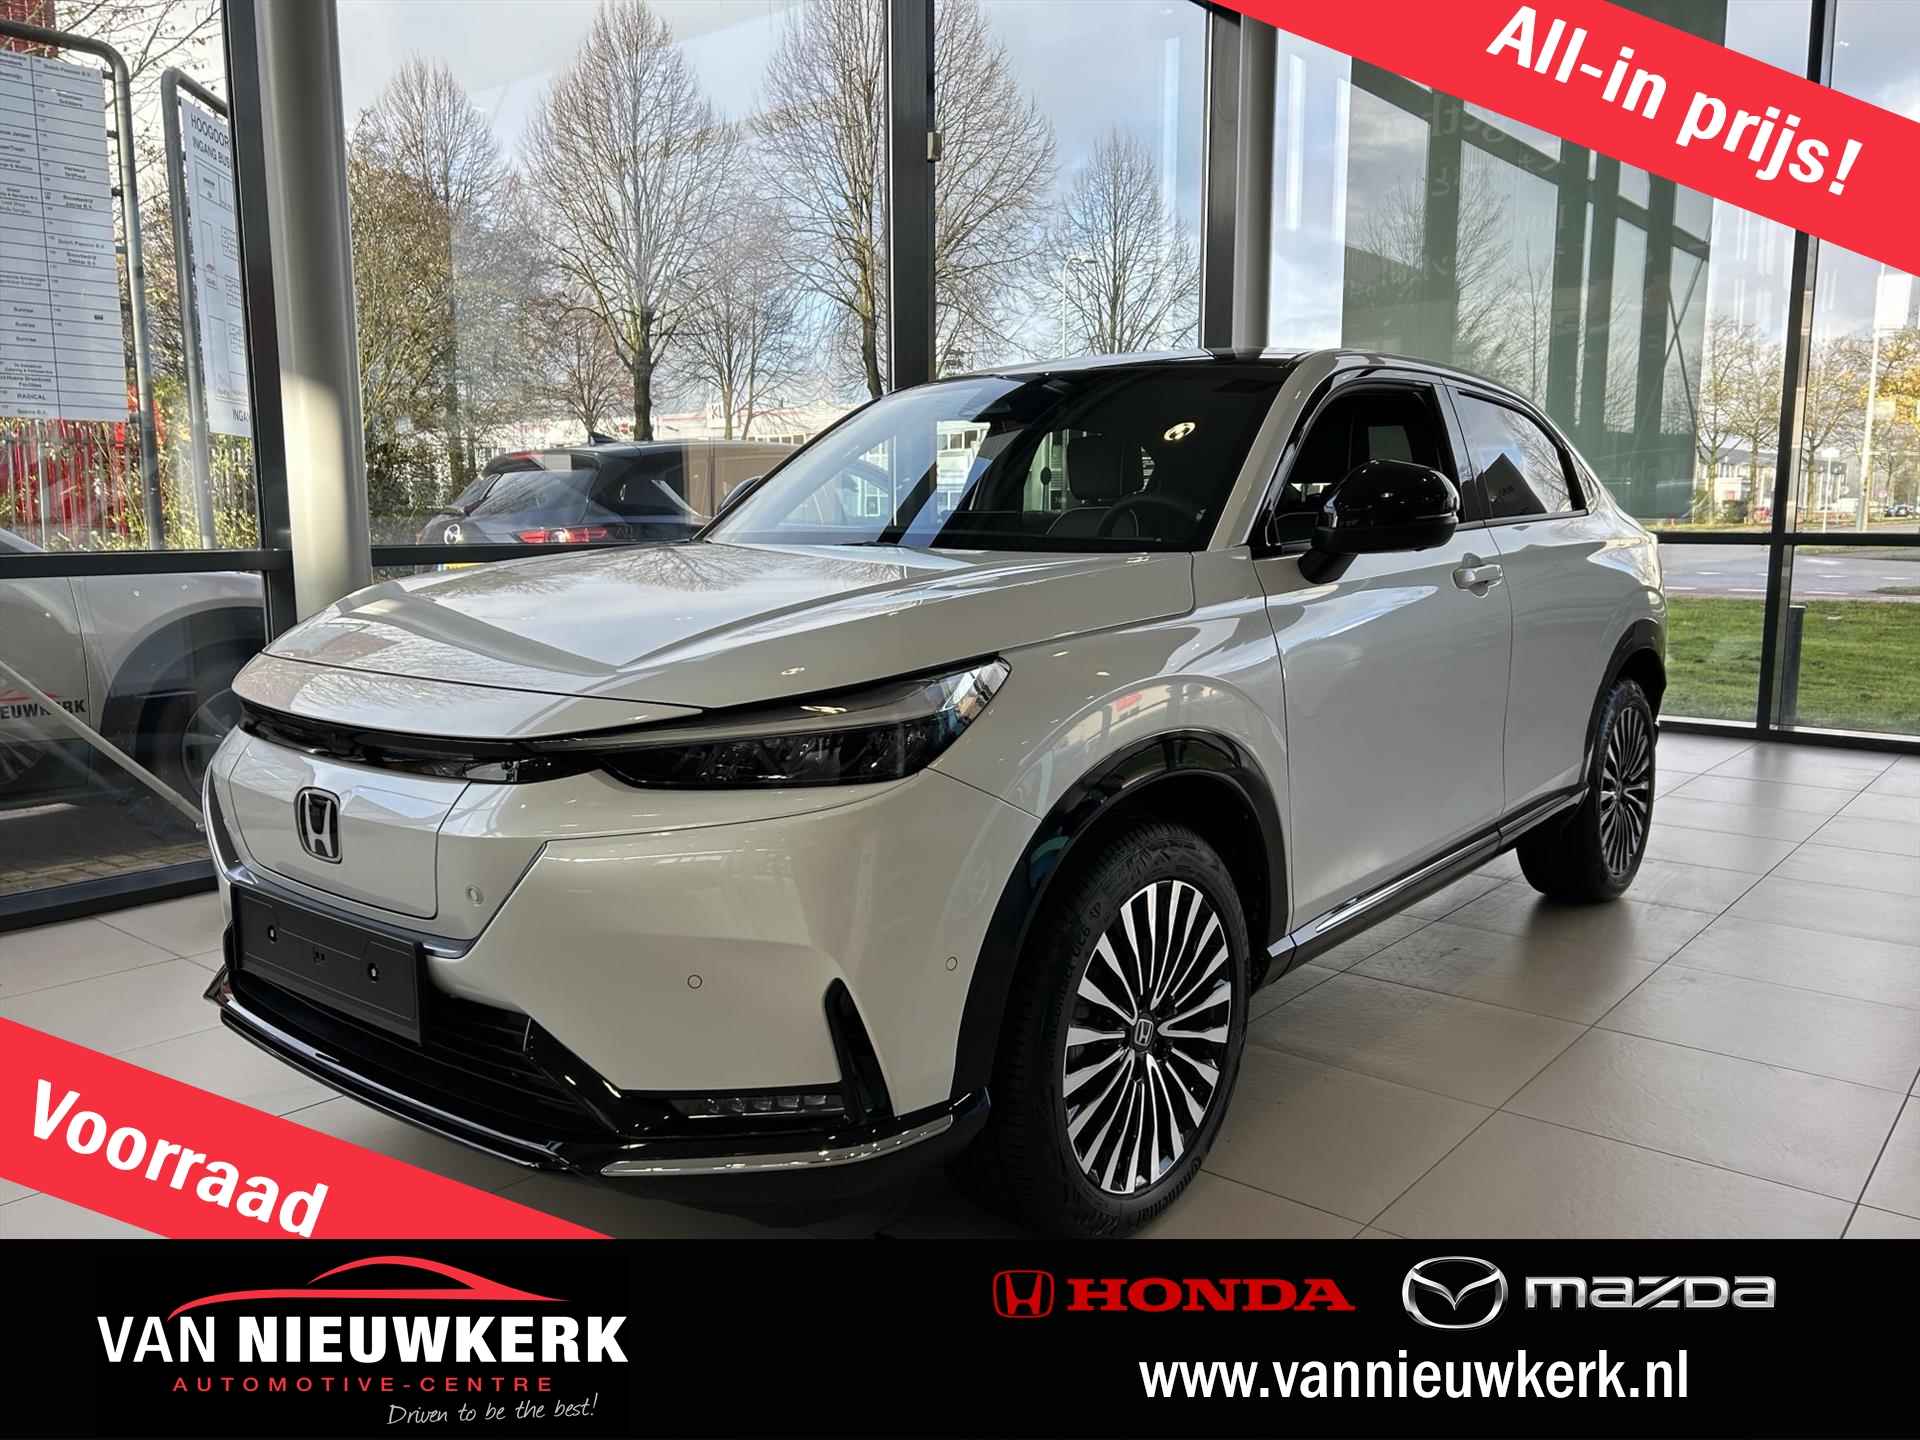 HONDA E:ny1 68,8 kWh 204pk Aut Limited Edition voordeel tot €10500 - 1/12